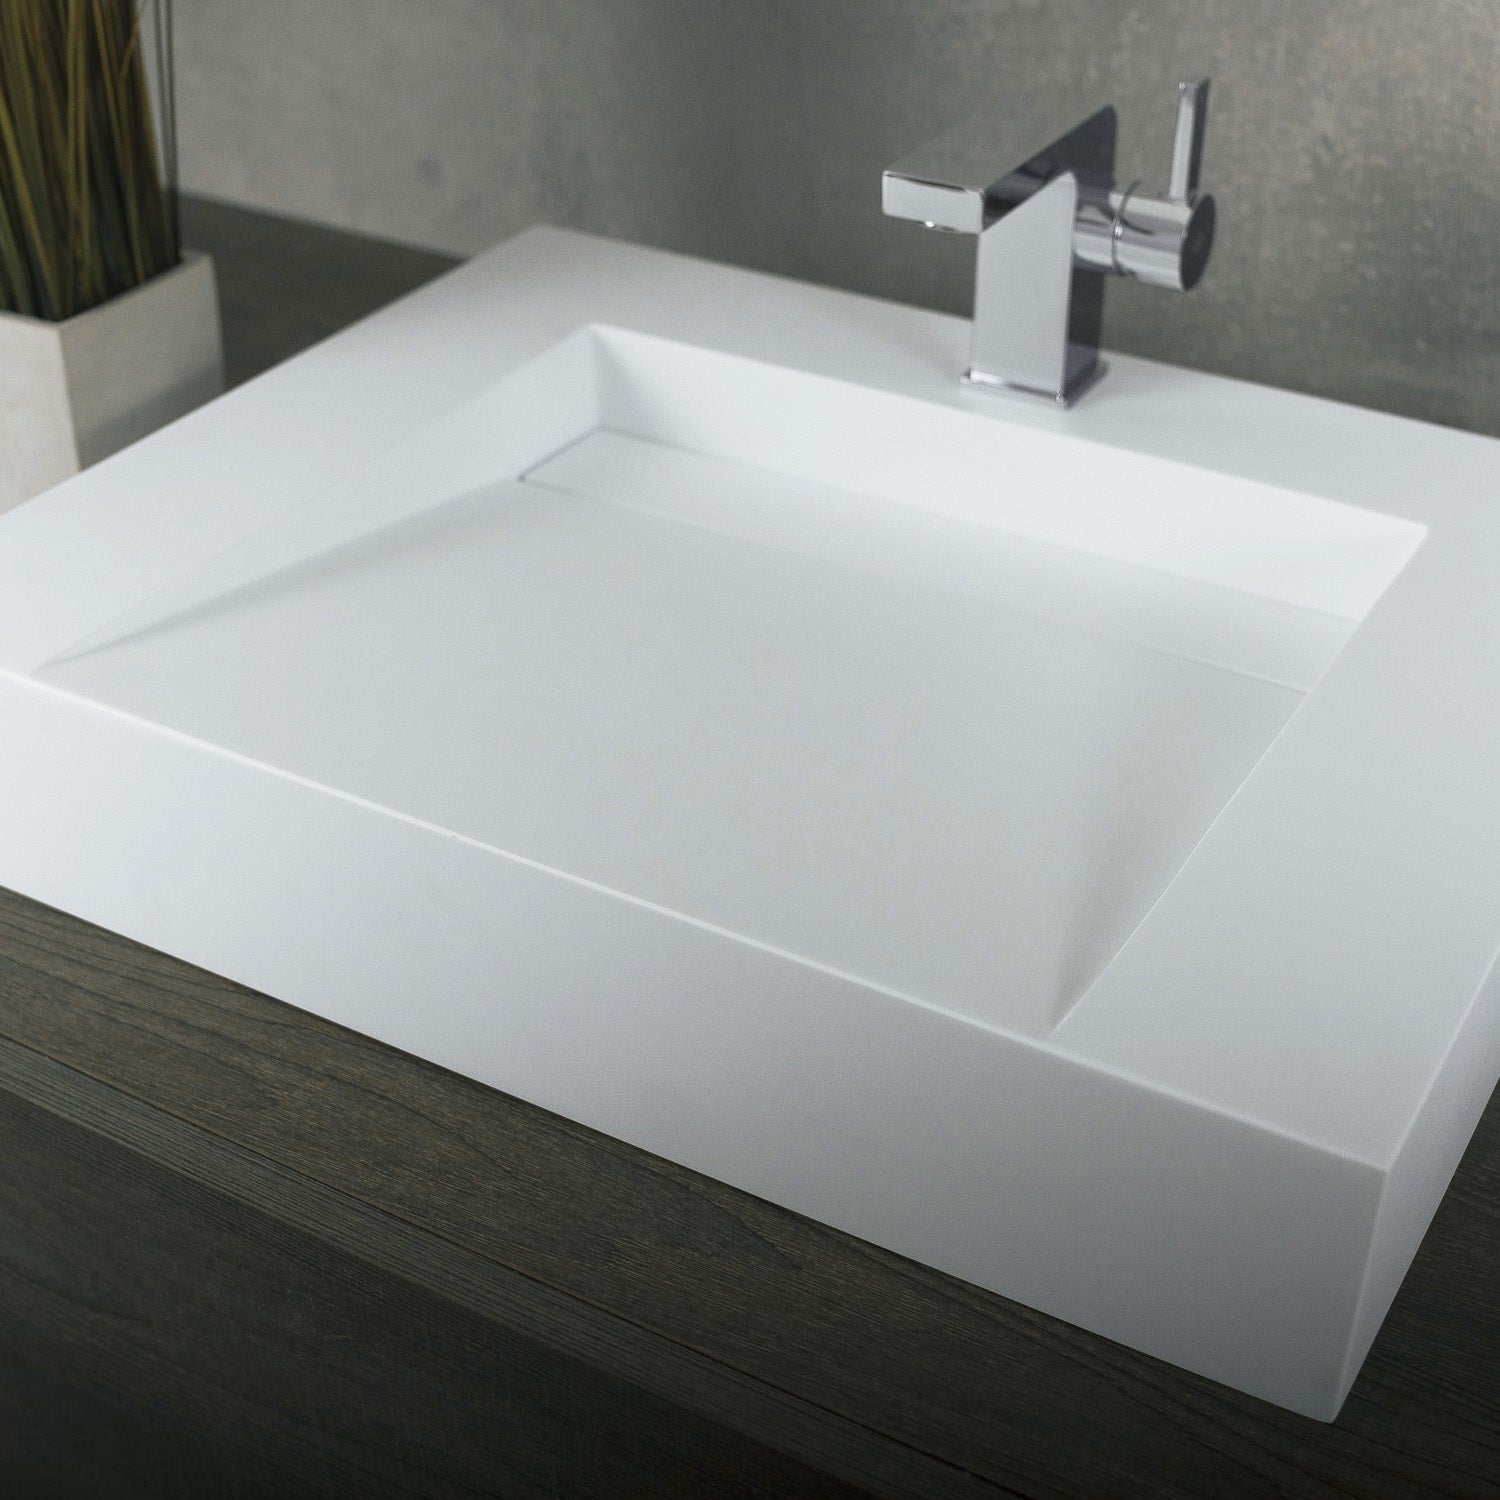 DAX Solid Surface Rectangle Single Bowl Wall Mount Bathroom Sink, White Matte Finish,  23-3/5 x 18-1/2 x 4 Inches (DAX-AB-1379)